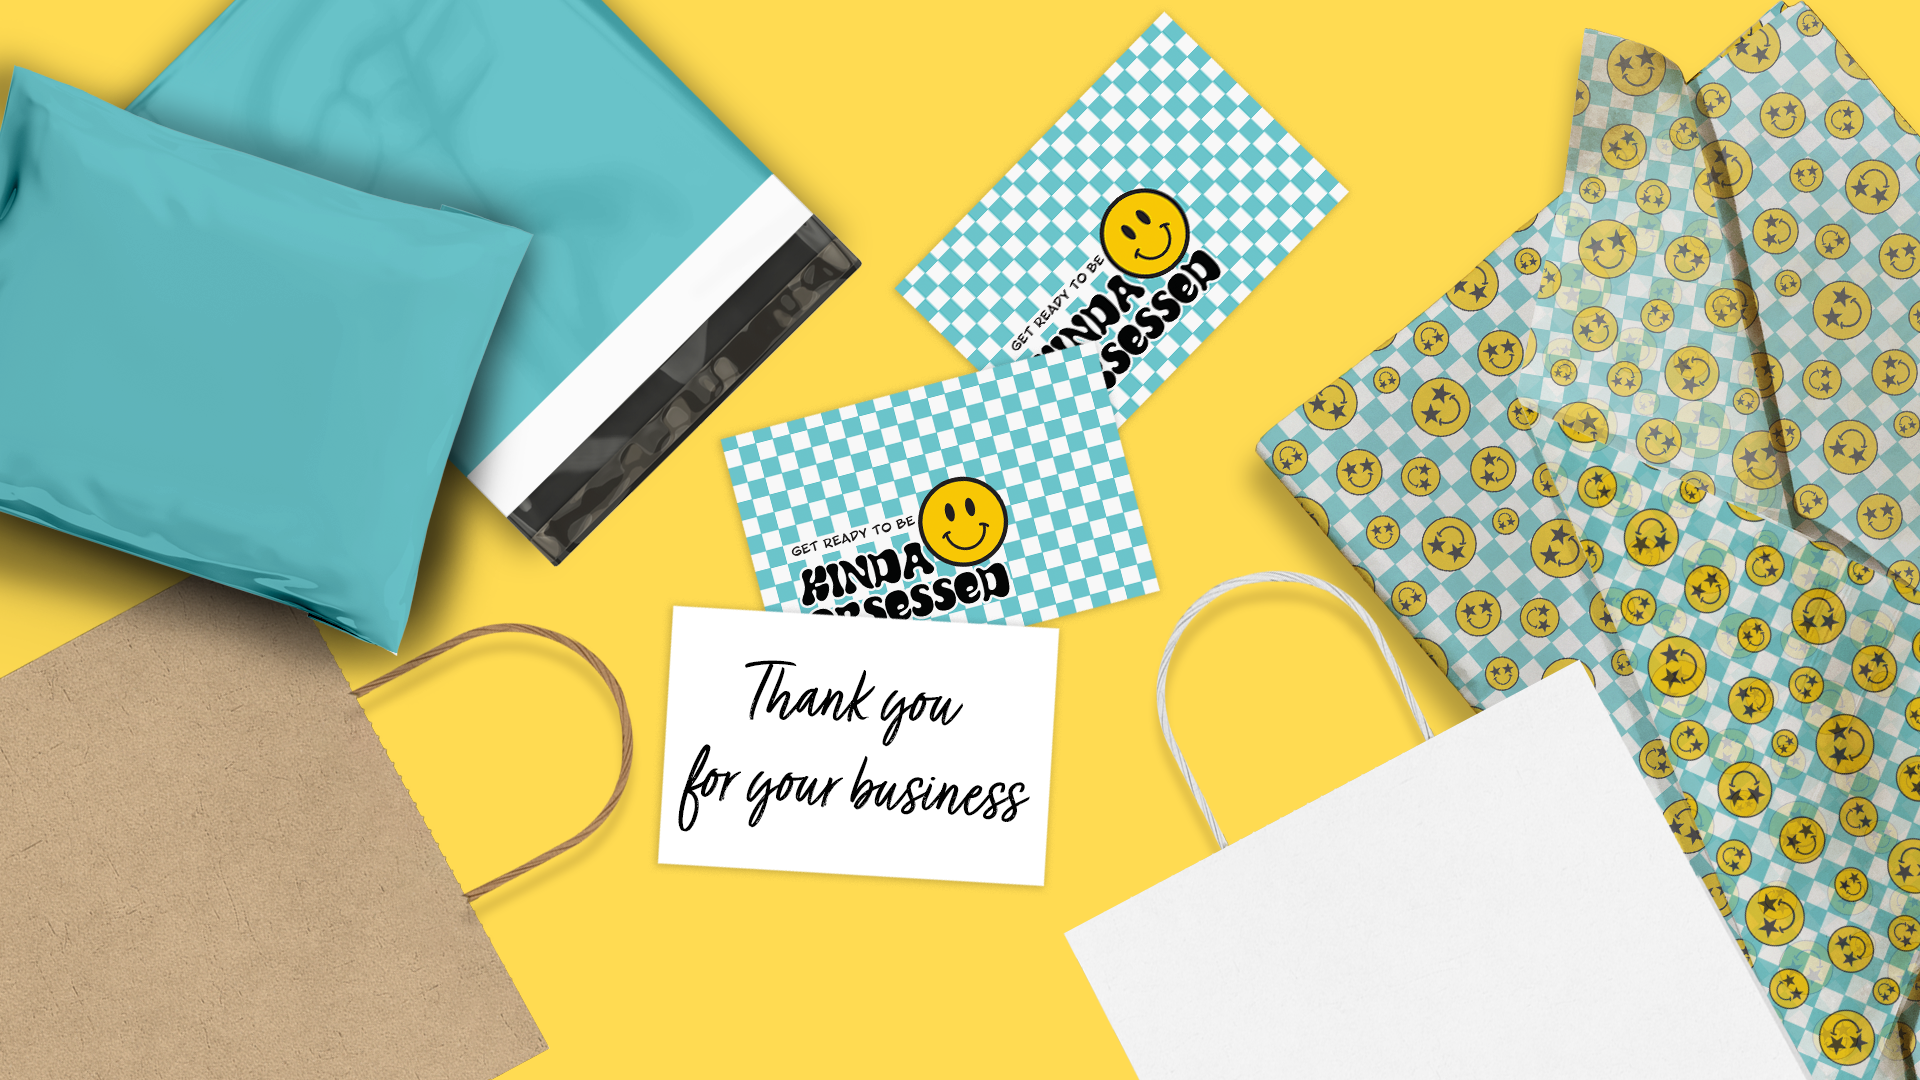 Kinda Obsessed Smiley Face Insert Cards for Business Customers